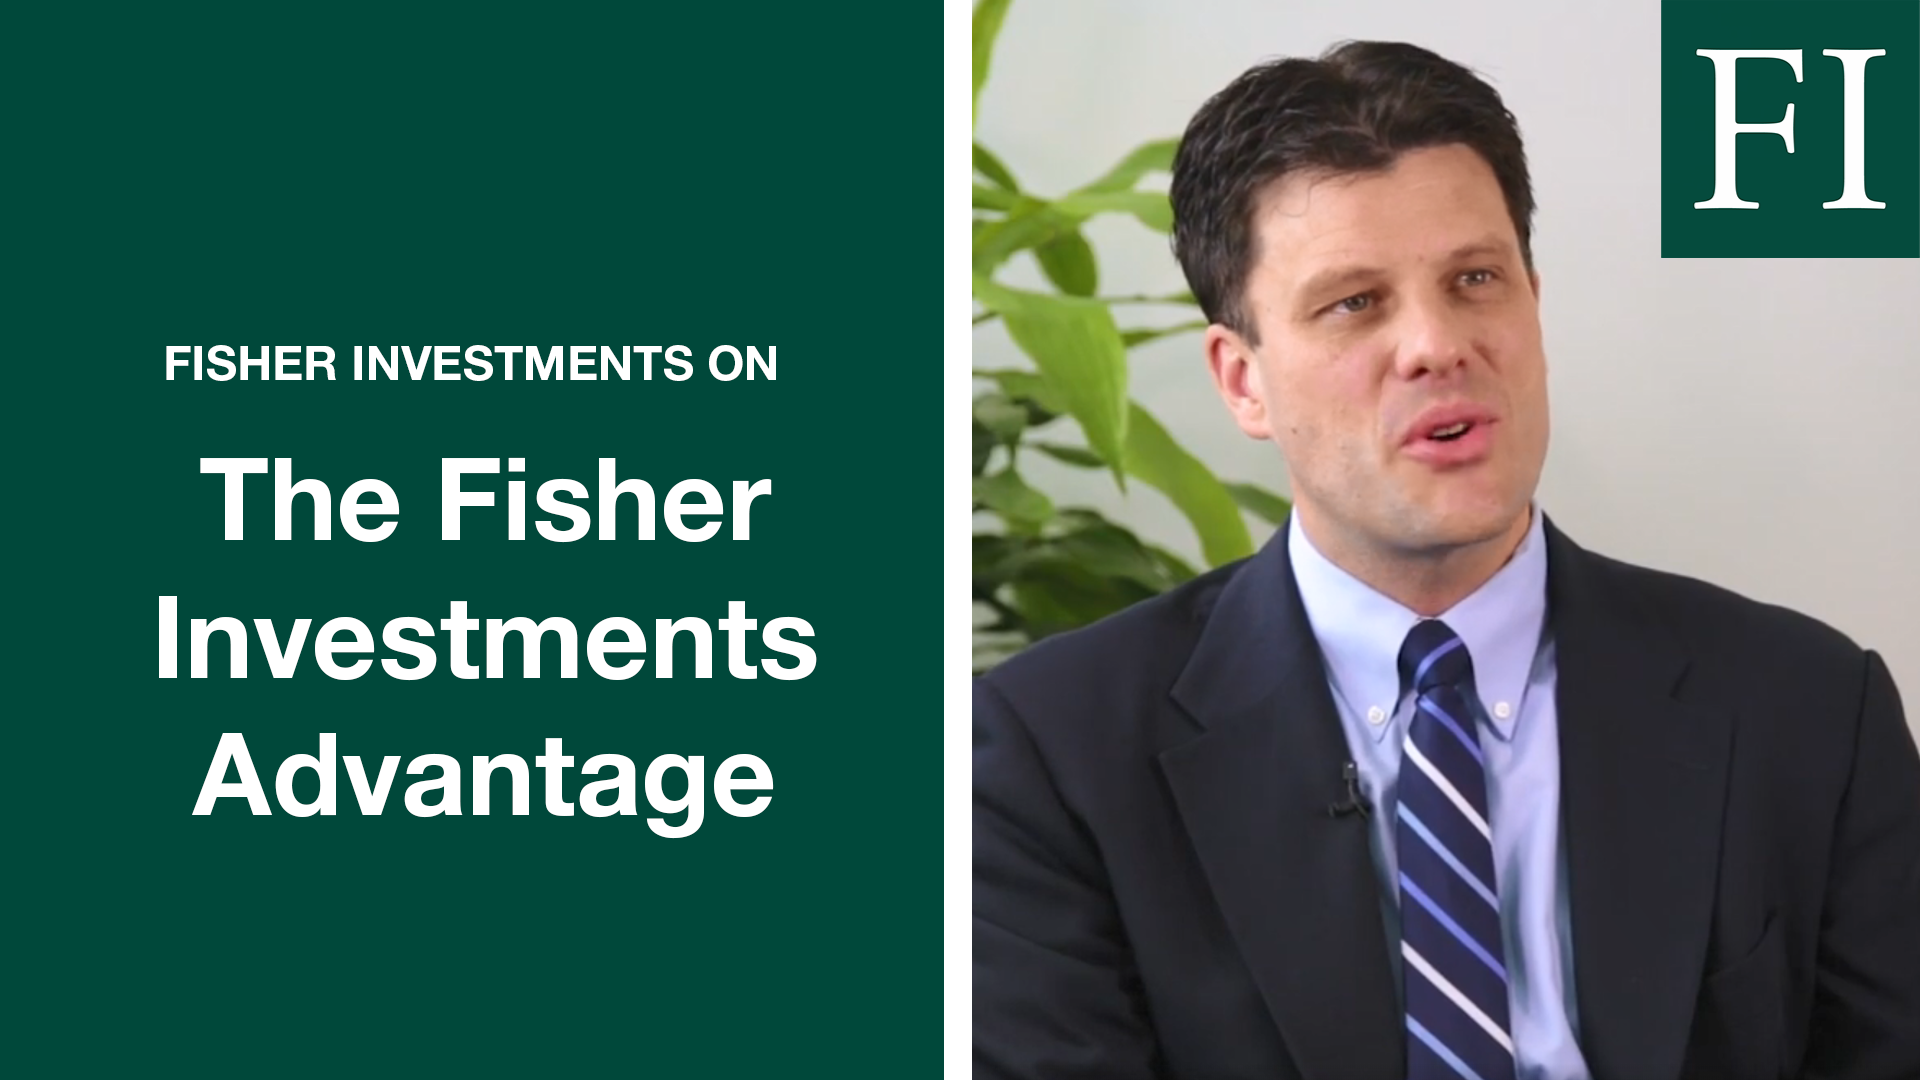 Video thumbnail for the "Advantages of Fisher Investments" video